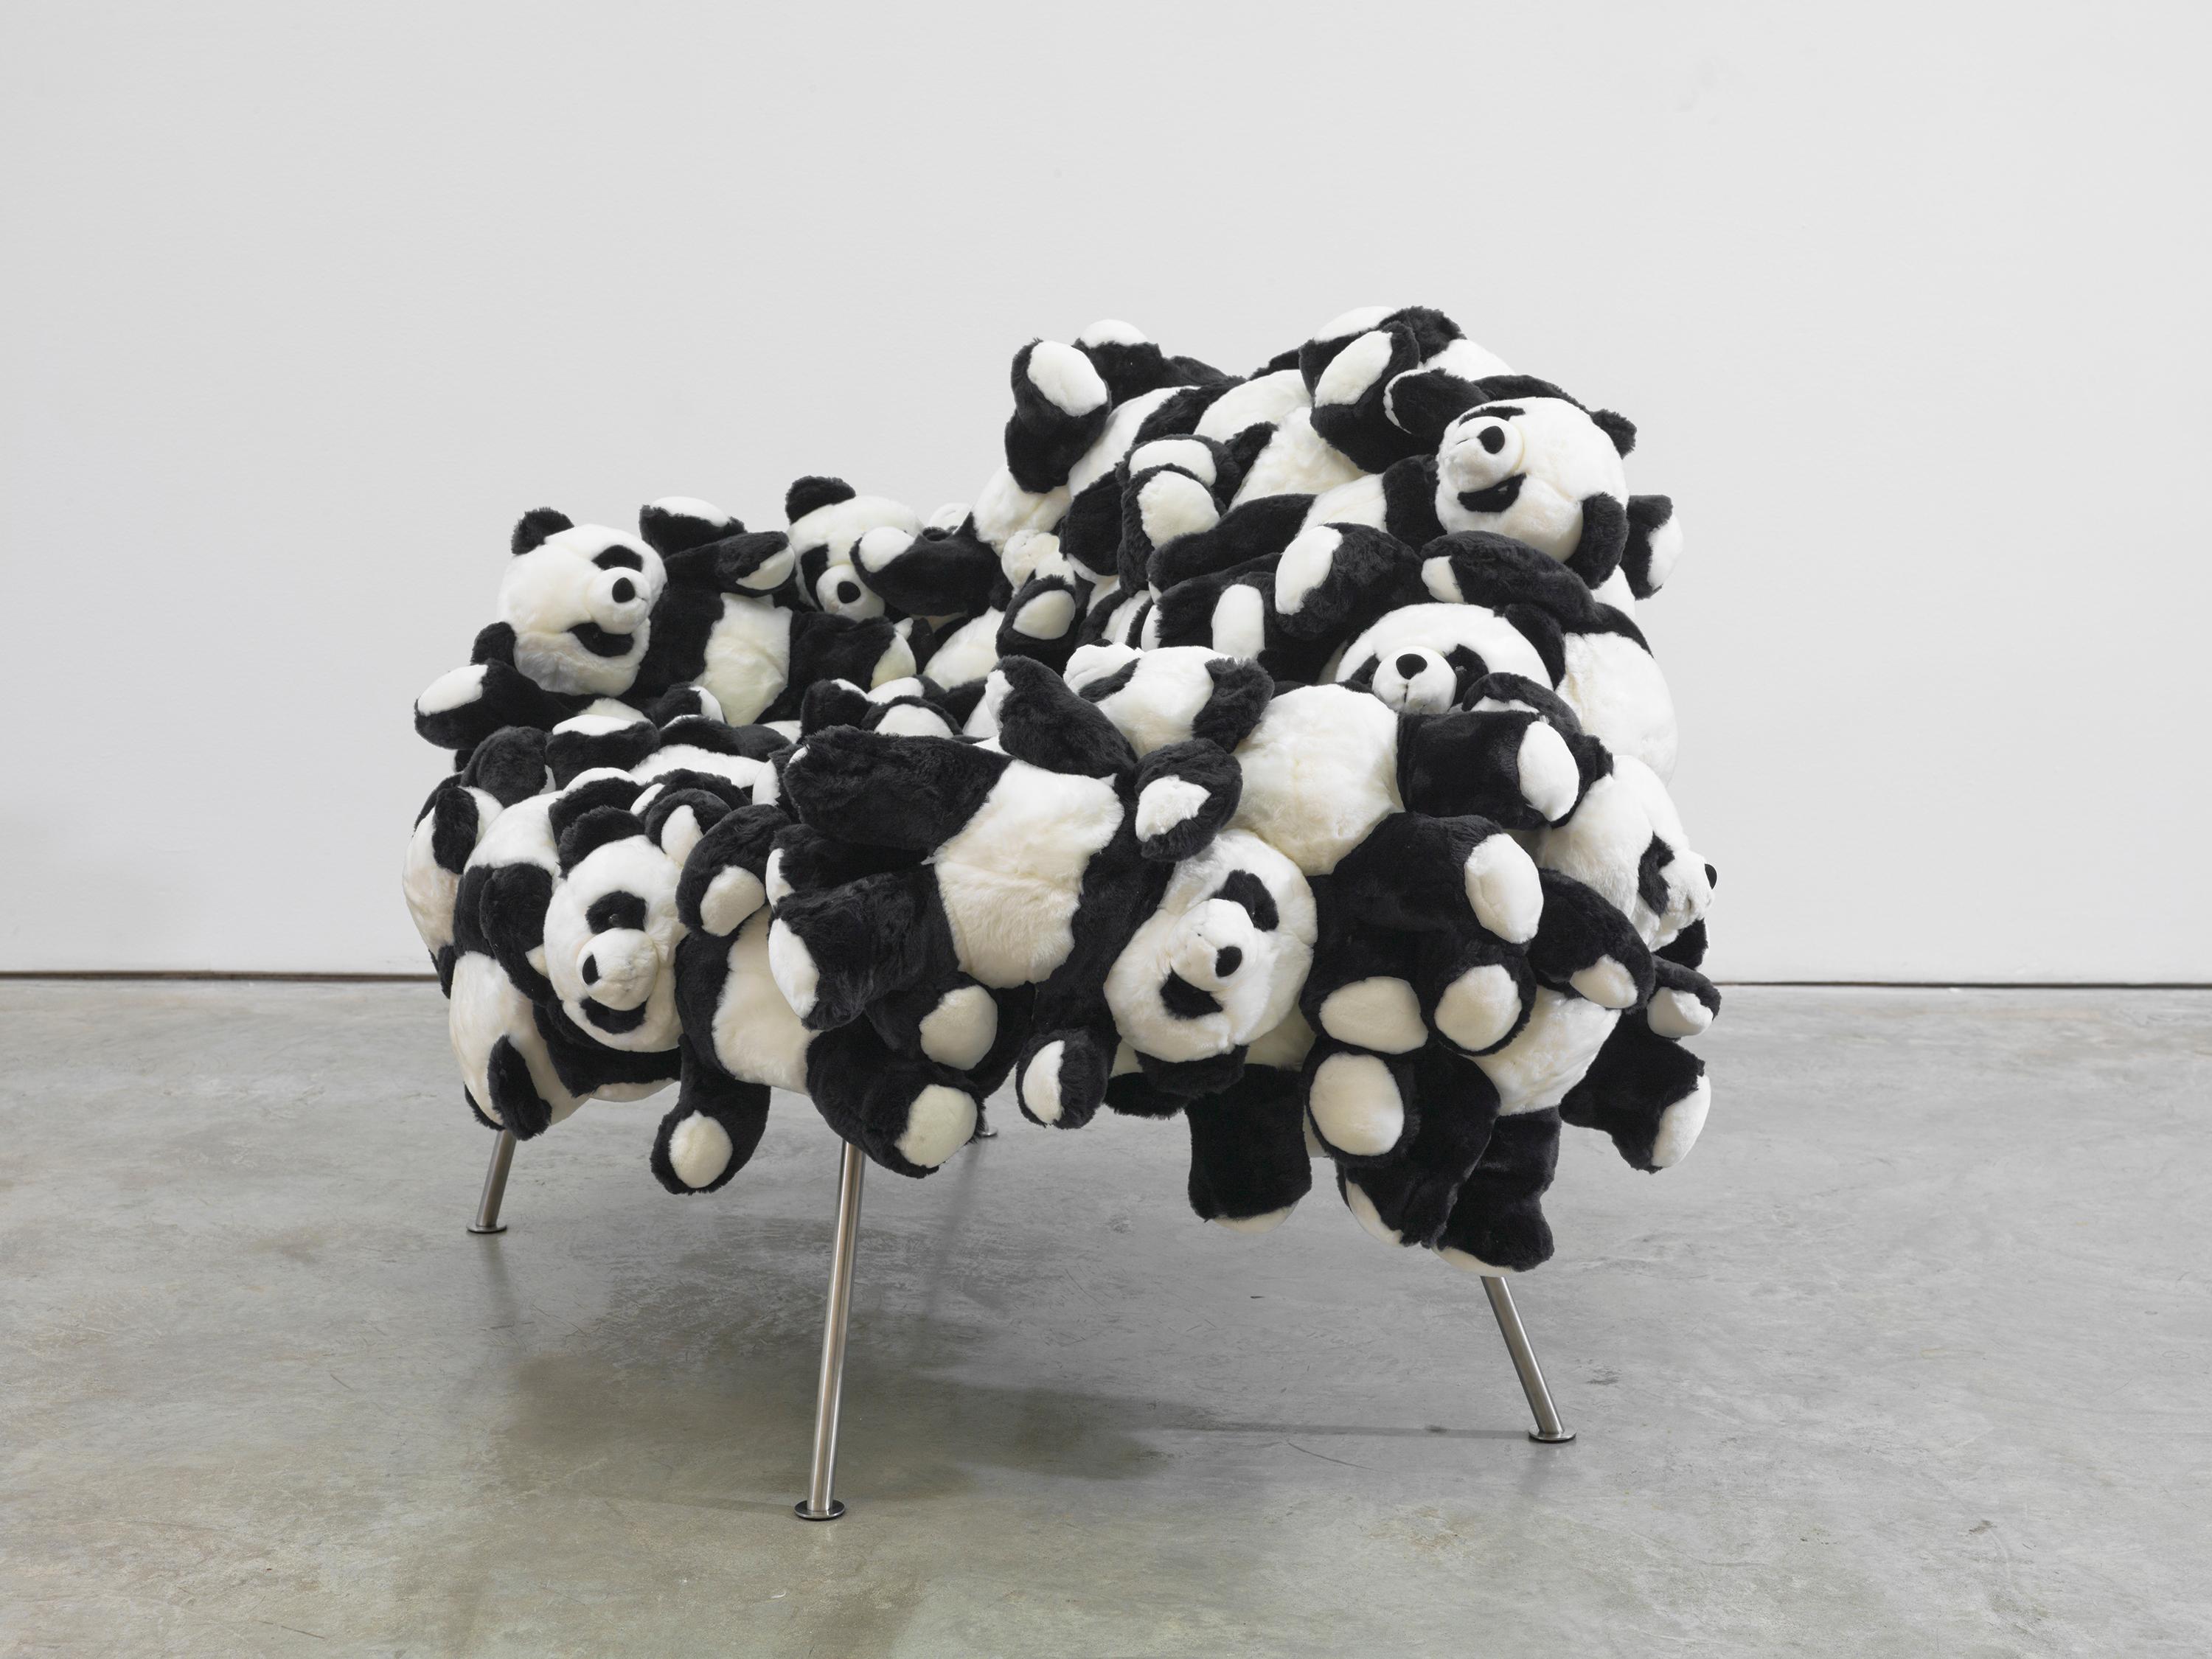 Fernando and Humberto Campana [Brazilian, b. 1961,1953]
Panda Banquete chair, Designed in 2005
Stuffed animals, stainless steel
Measures: 39.25 x 55 x 33.5 inches
100 x 140 x 85 cm
Edition of 25.